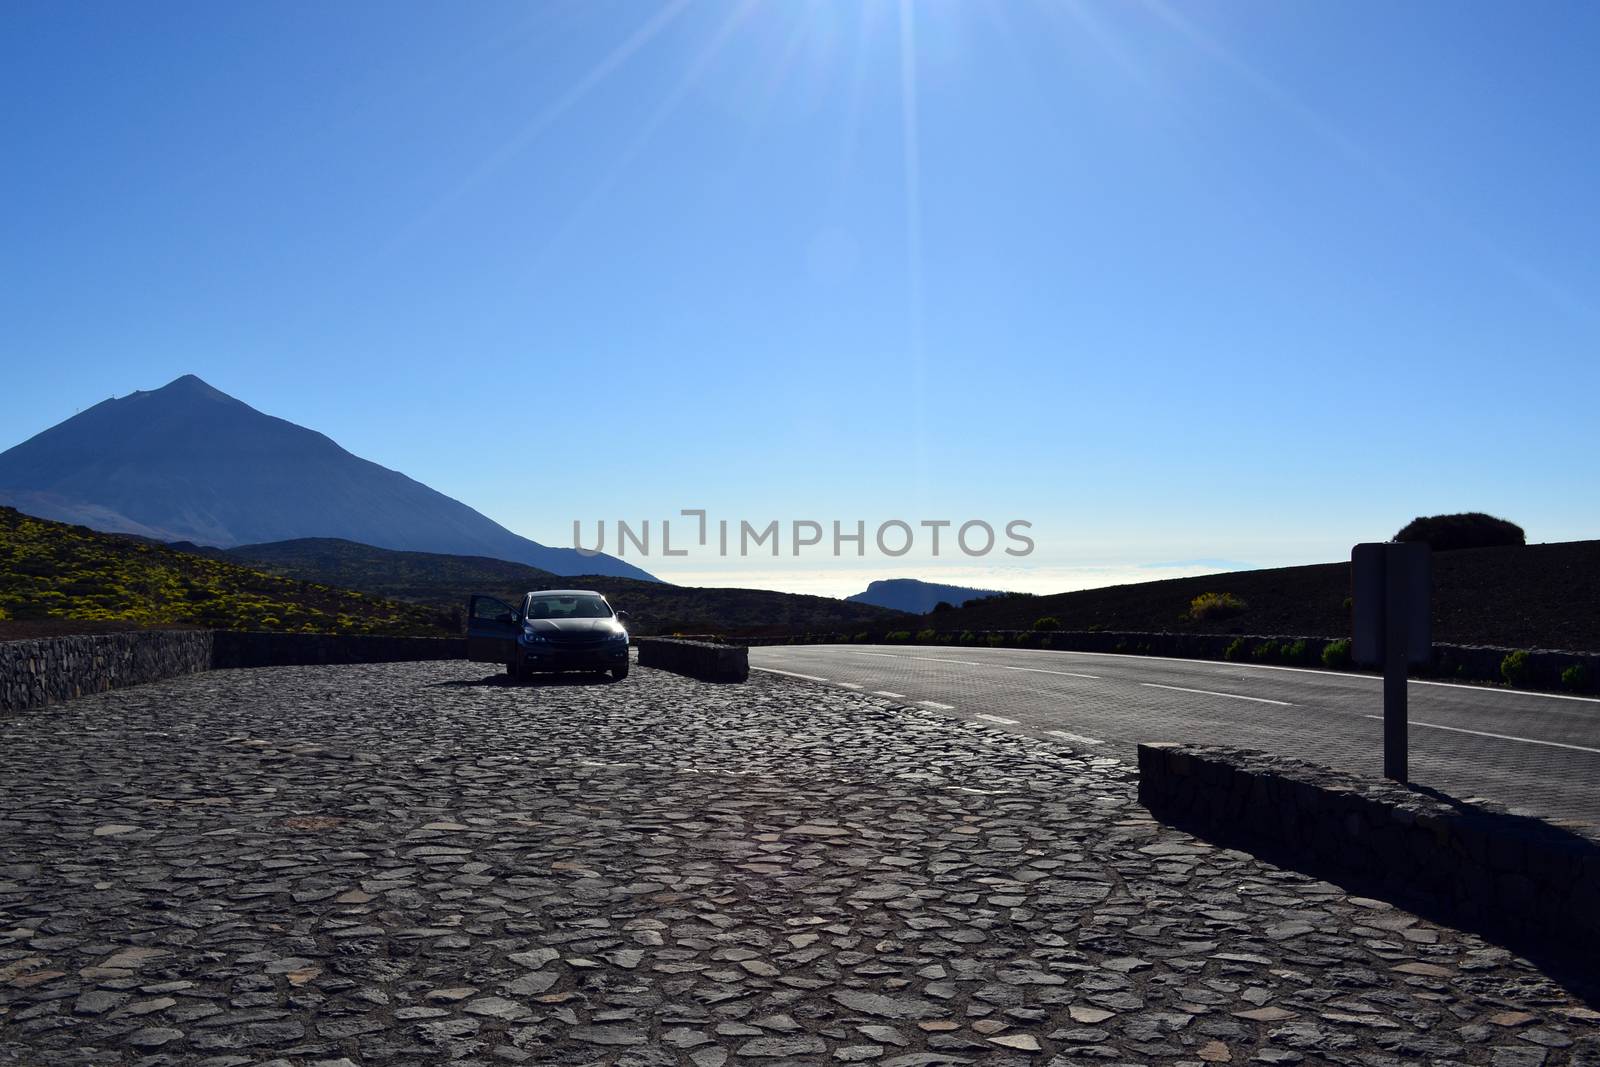 Road travel concept with car and Teide Peak in Tenerife, Canary Islands, Spain